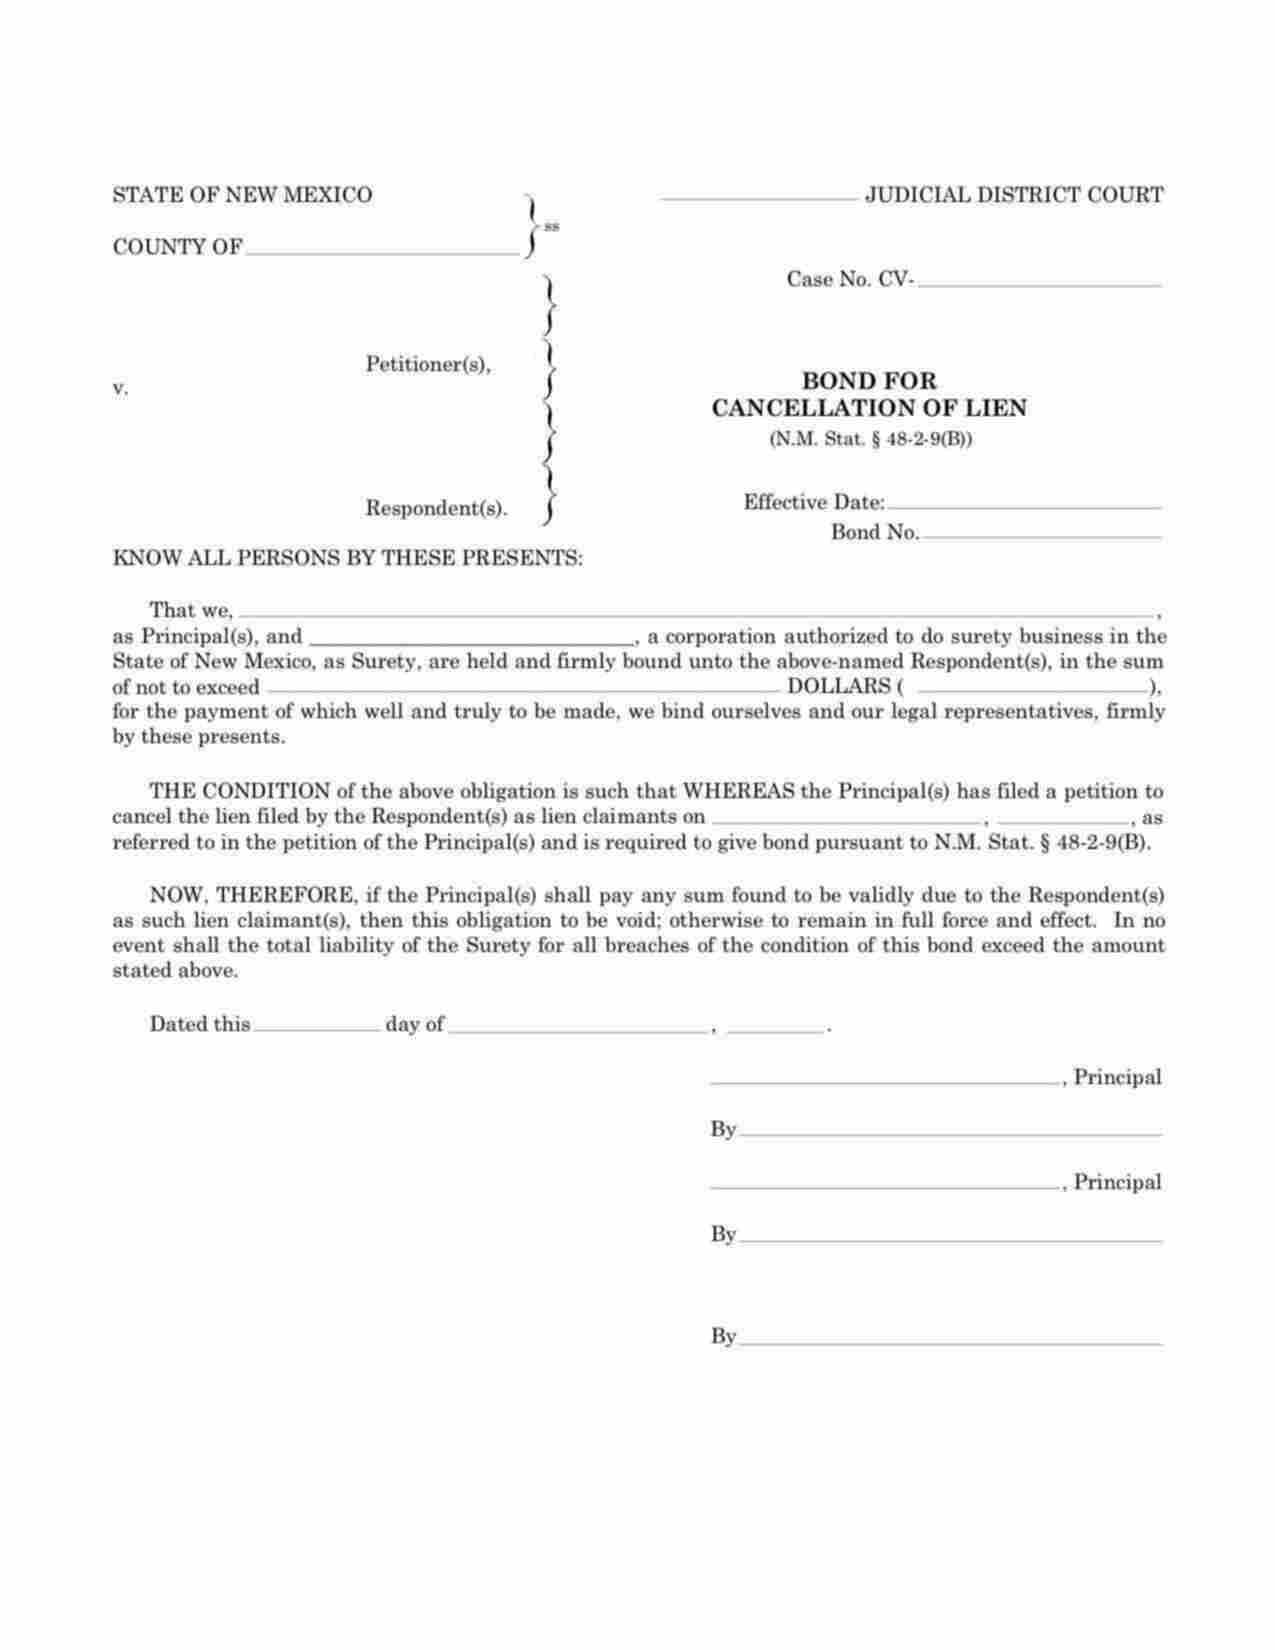 New Mexico Cancellation of Lien Bond Form